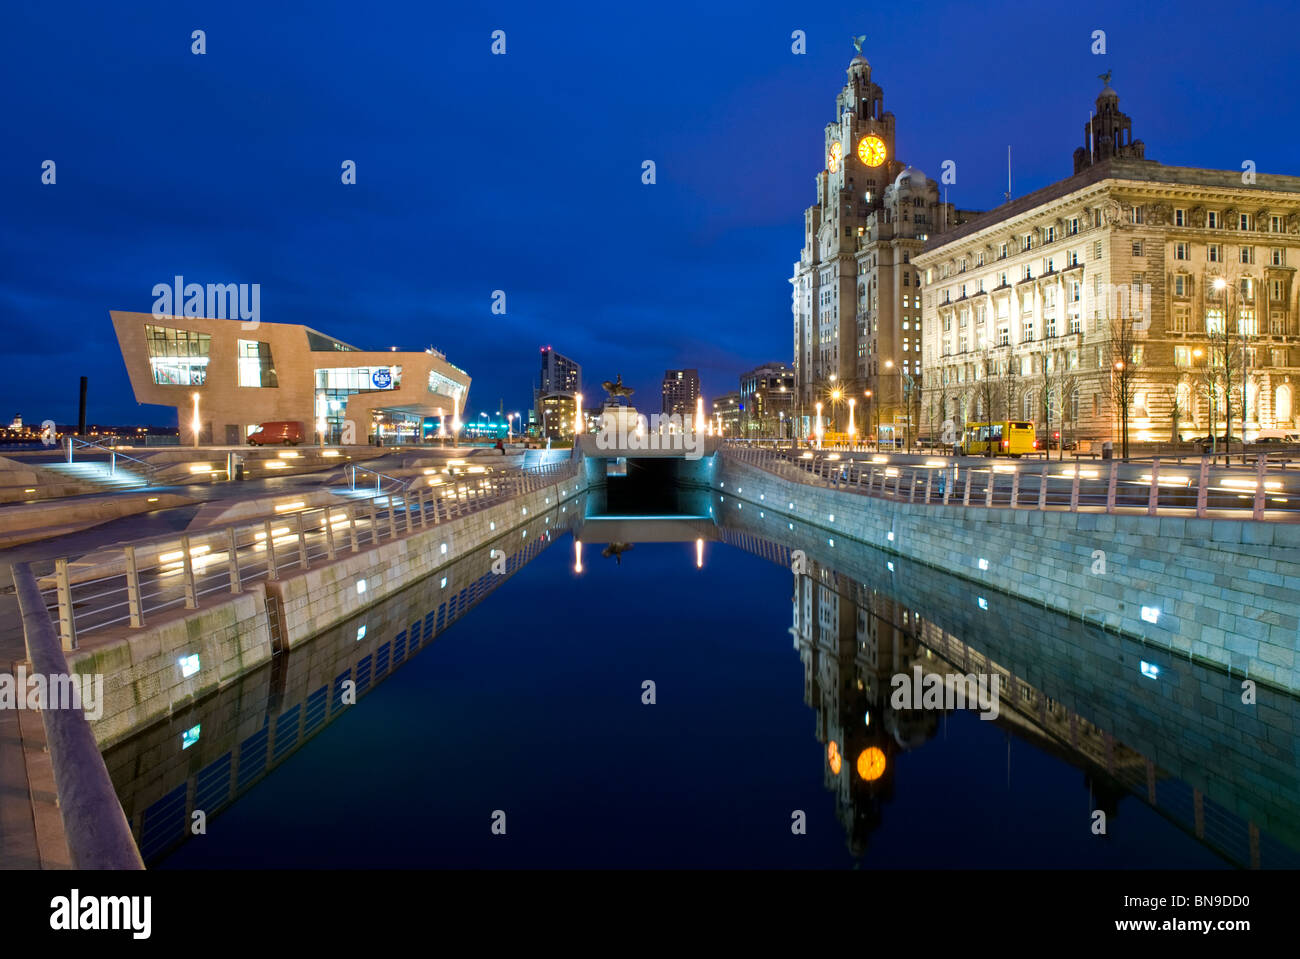 The Pier Head New Ferry Terminal Building & Liver Building at Night, Pier Head, Liverpool, merseyside, England, UK Stock Photo